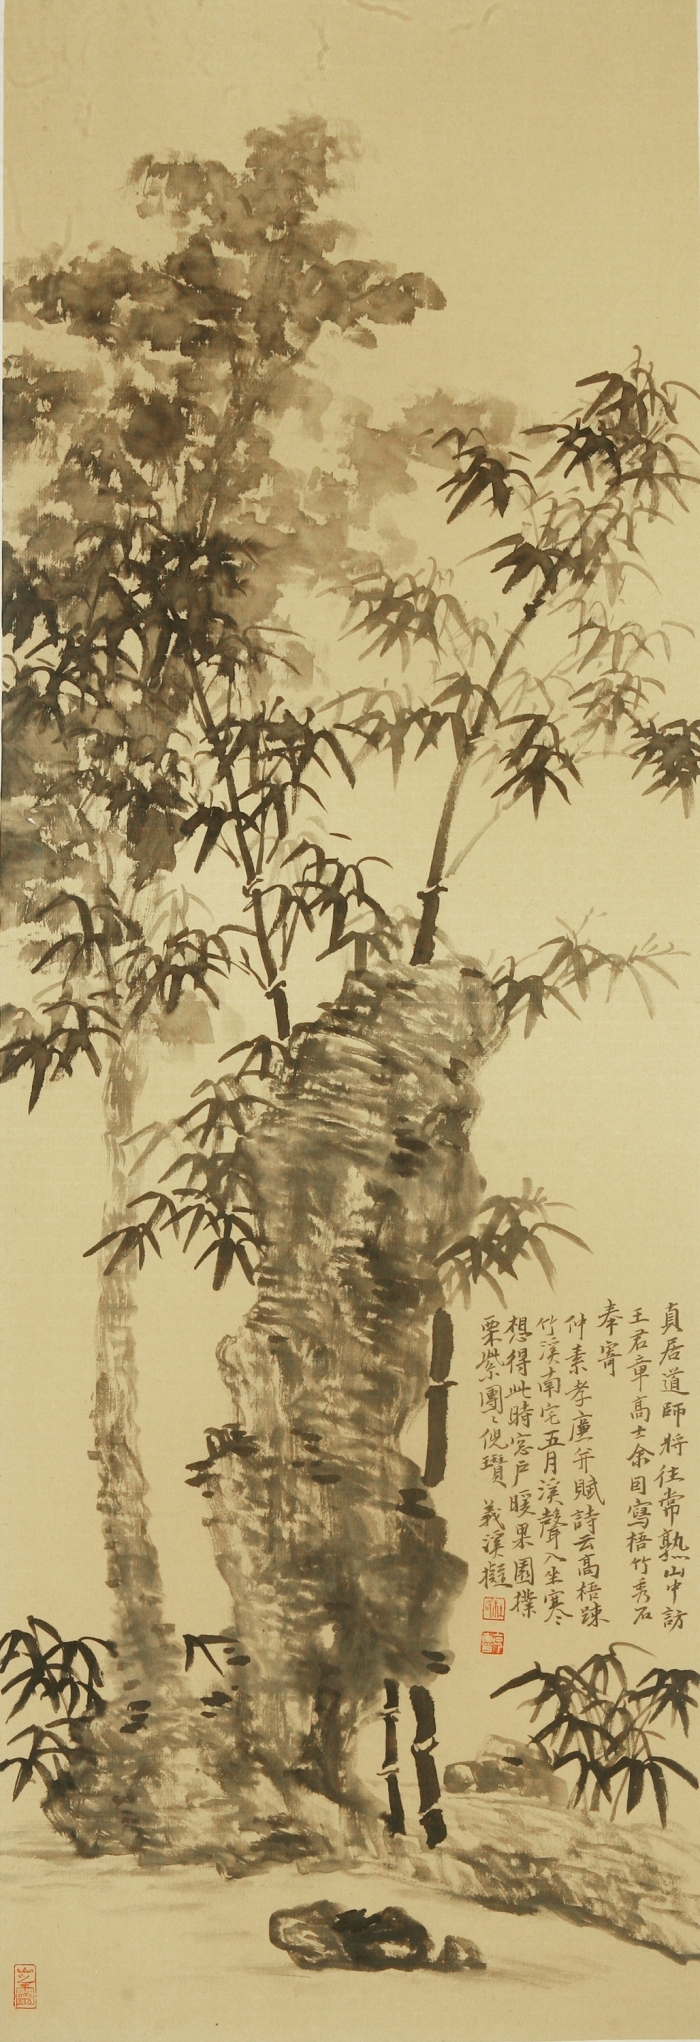 Hefeng Hall Gallery's Contemporary Chinese Painting - Learning form the Past 1